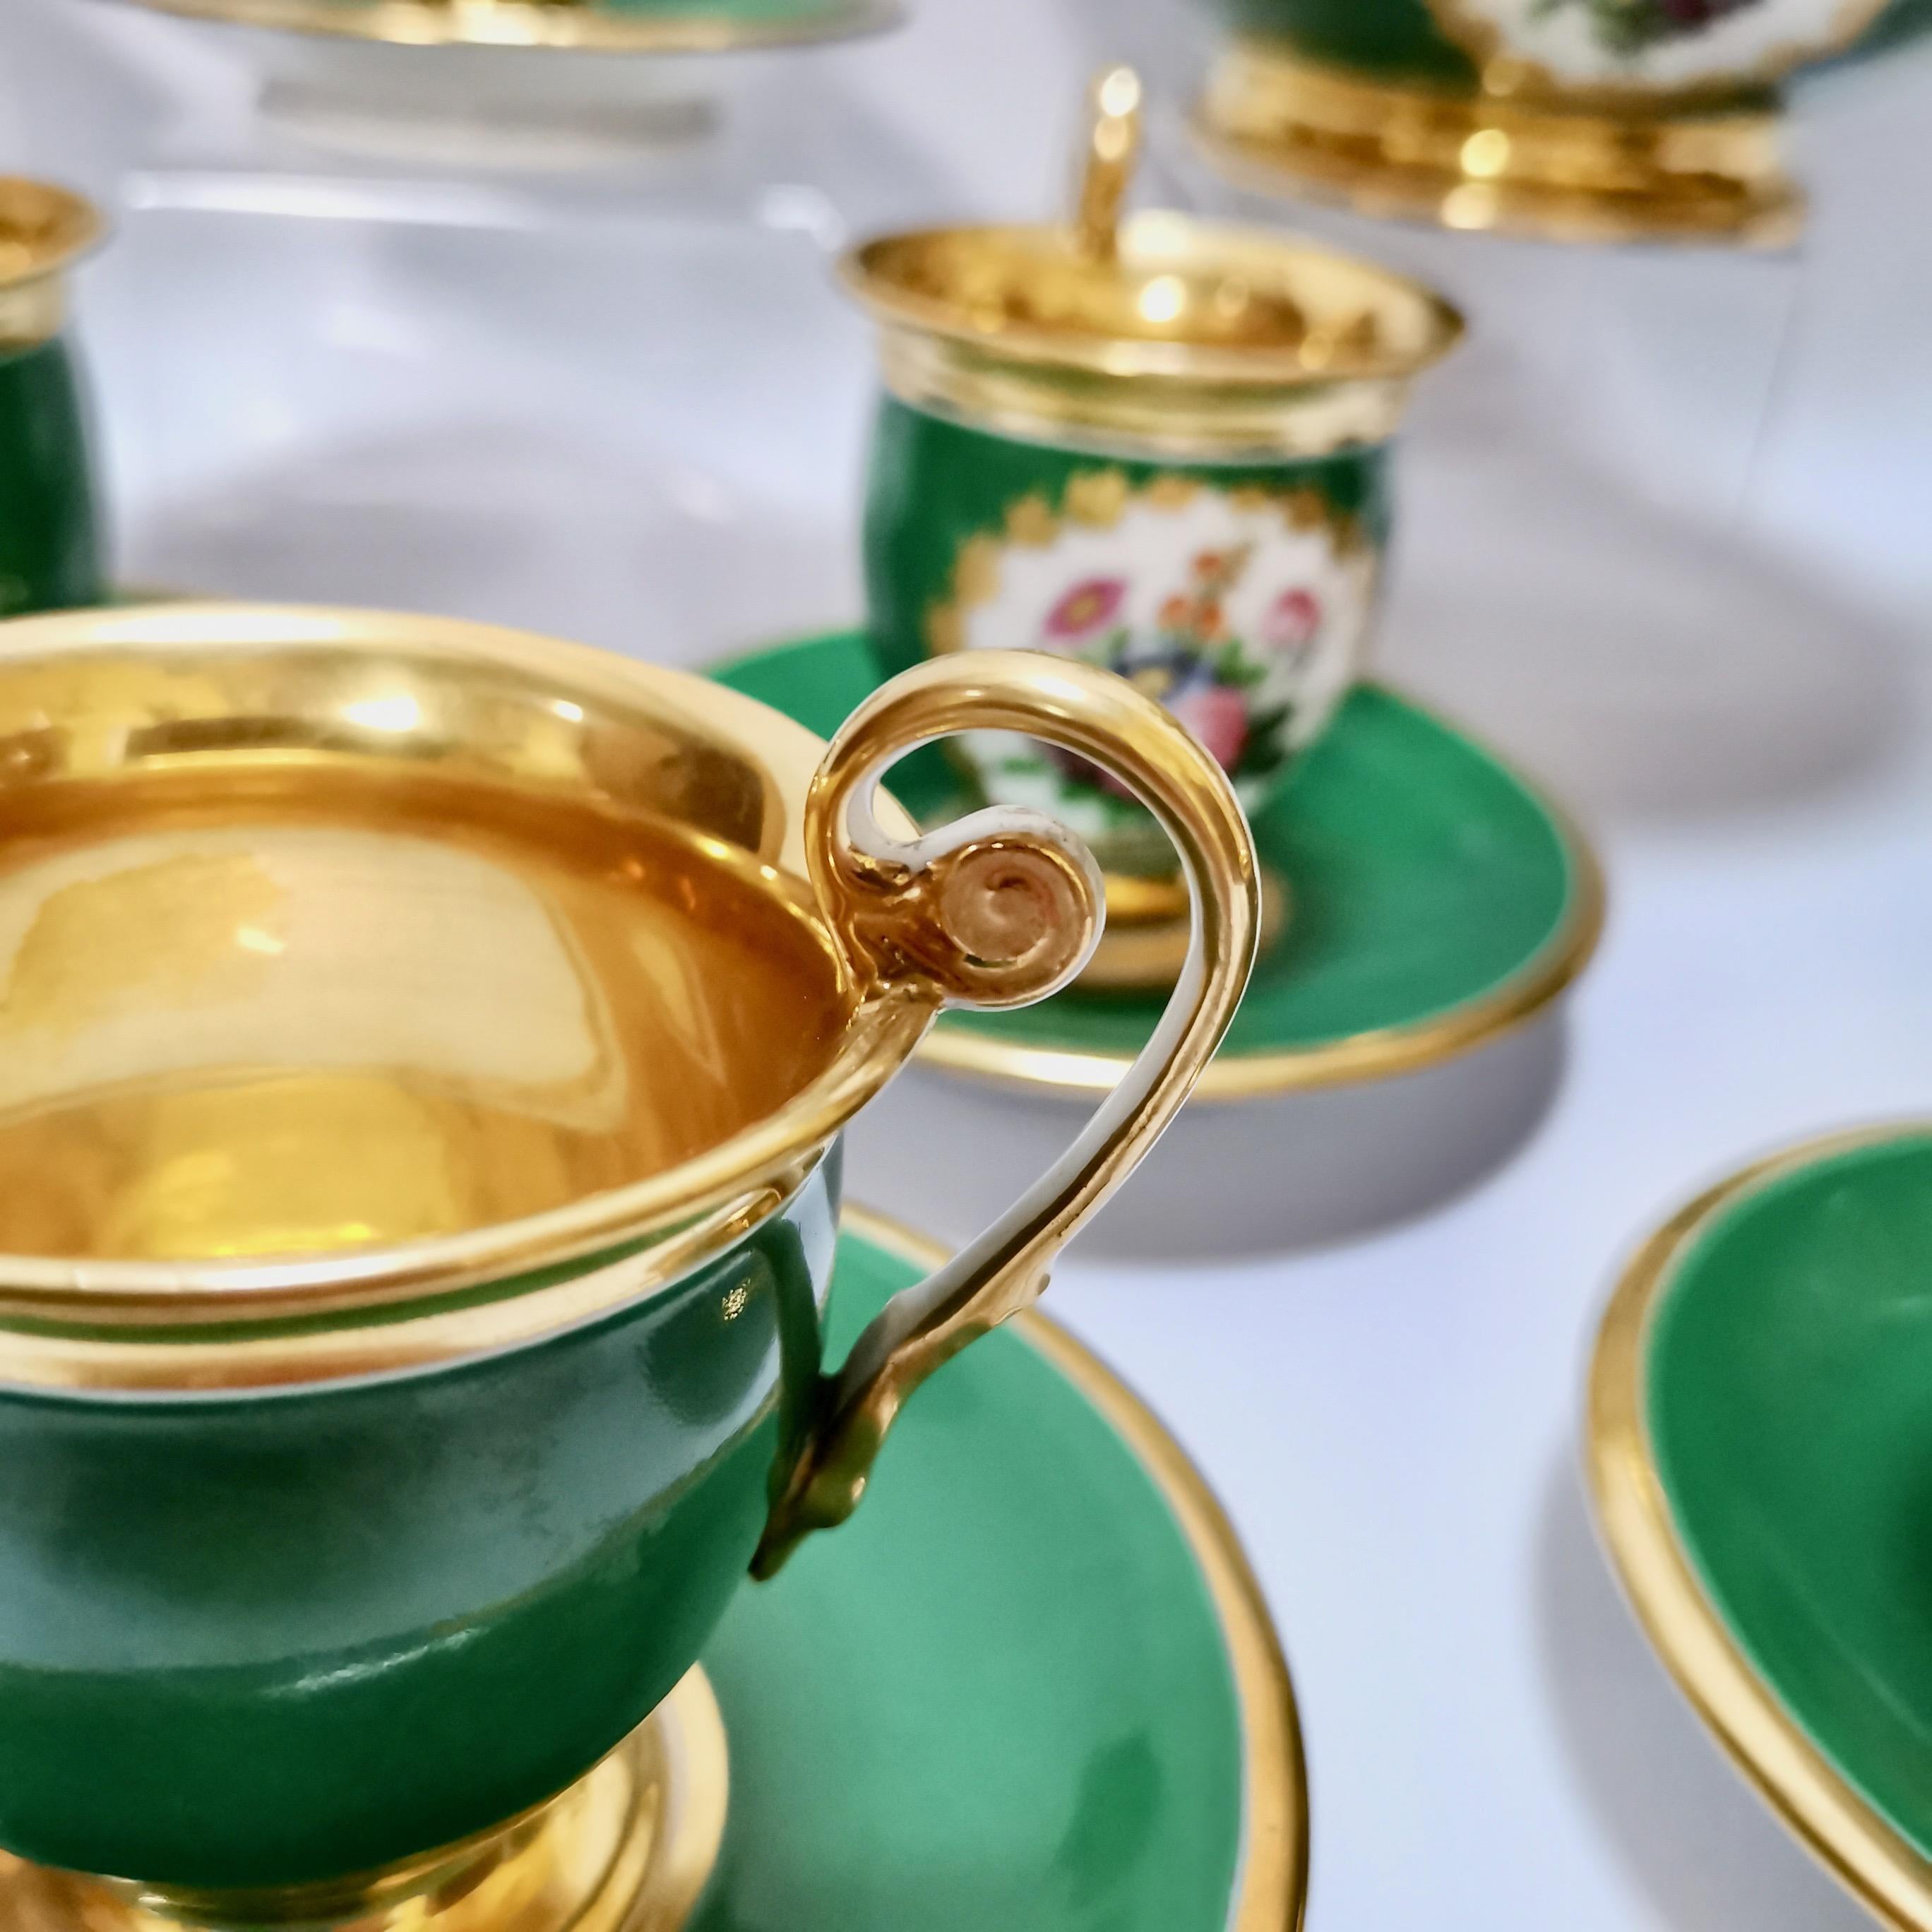 Paris Porcelain Coffee Service, Emerald Green and Floral, Empire Style ca 1820 6